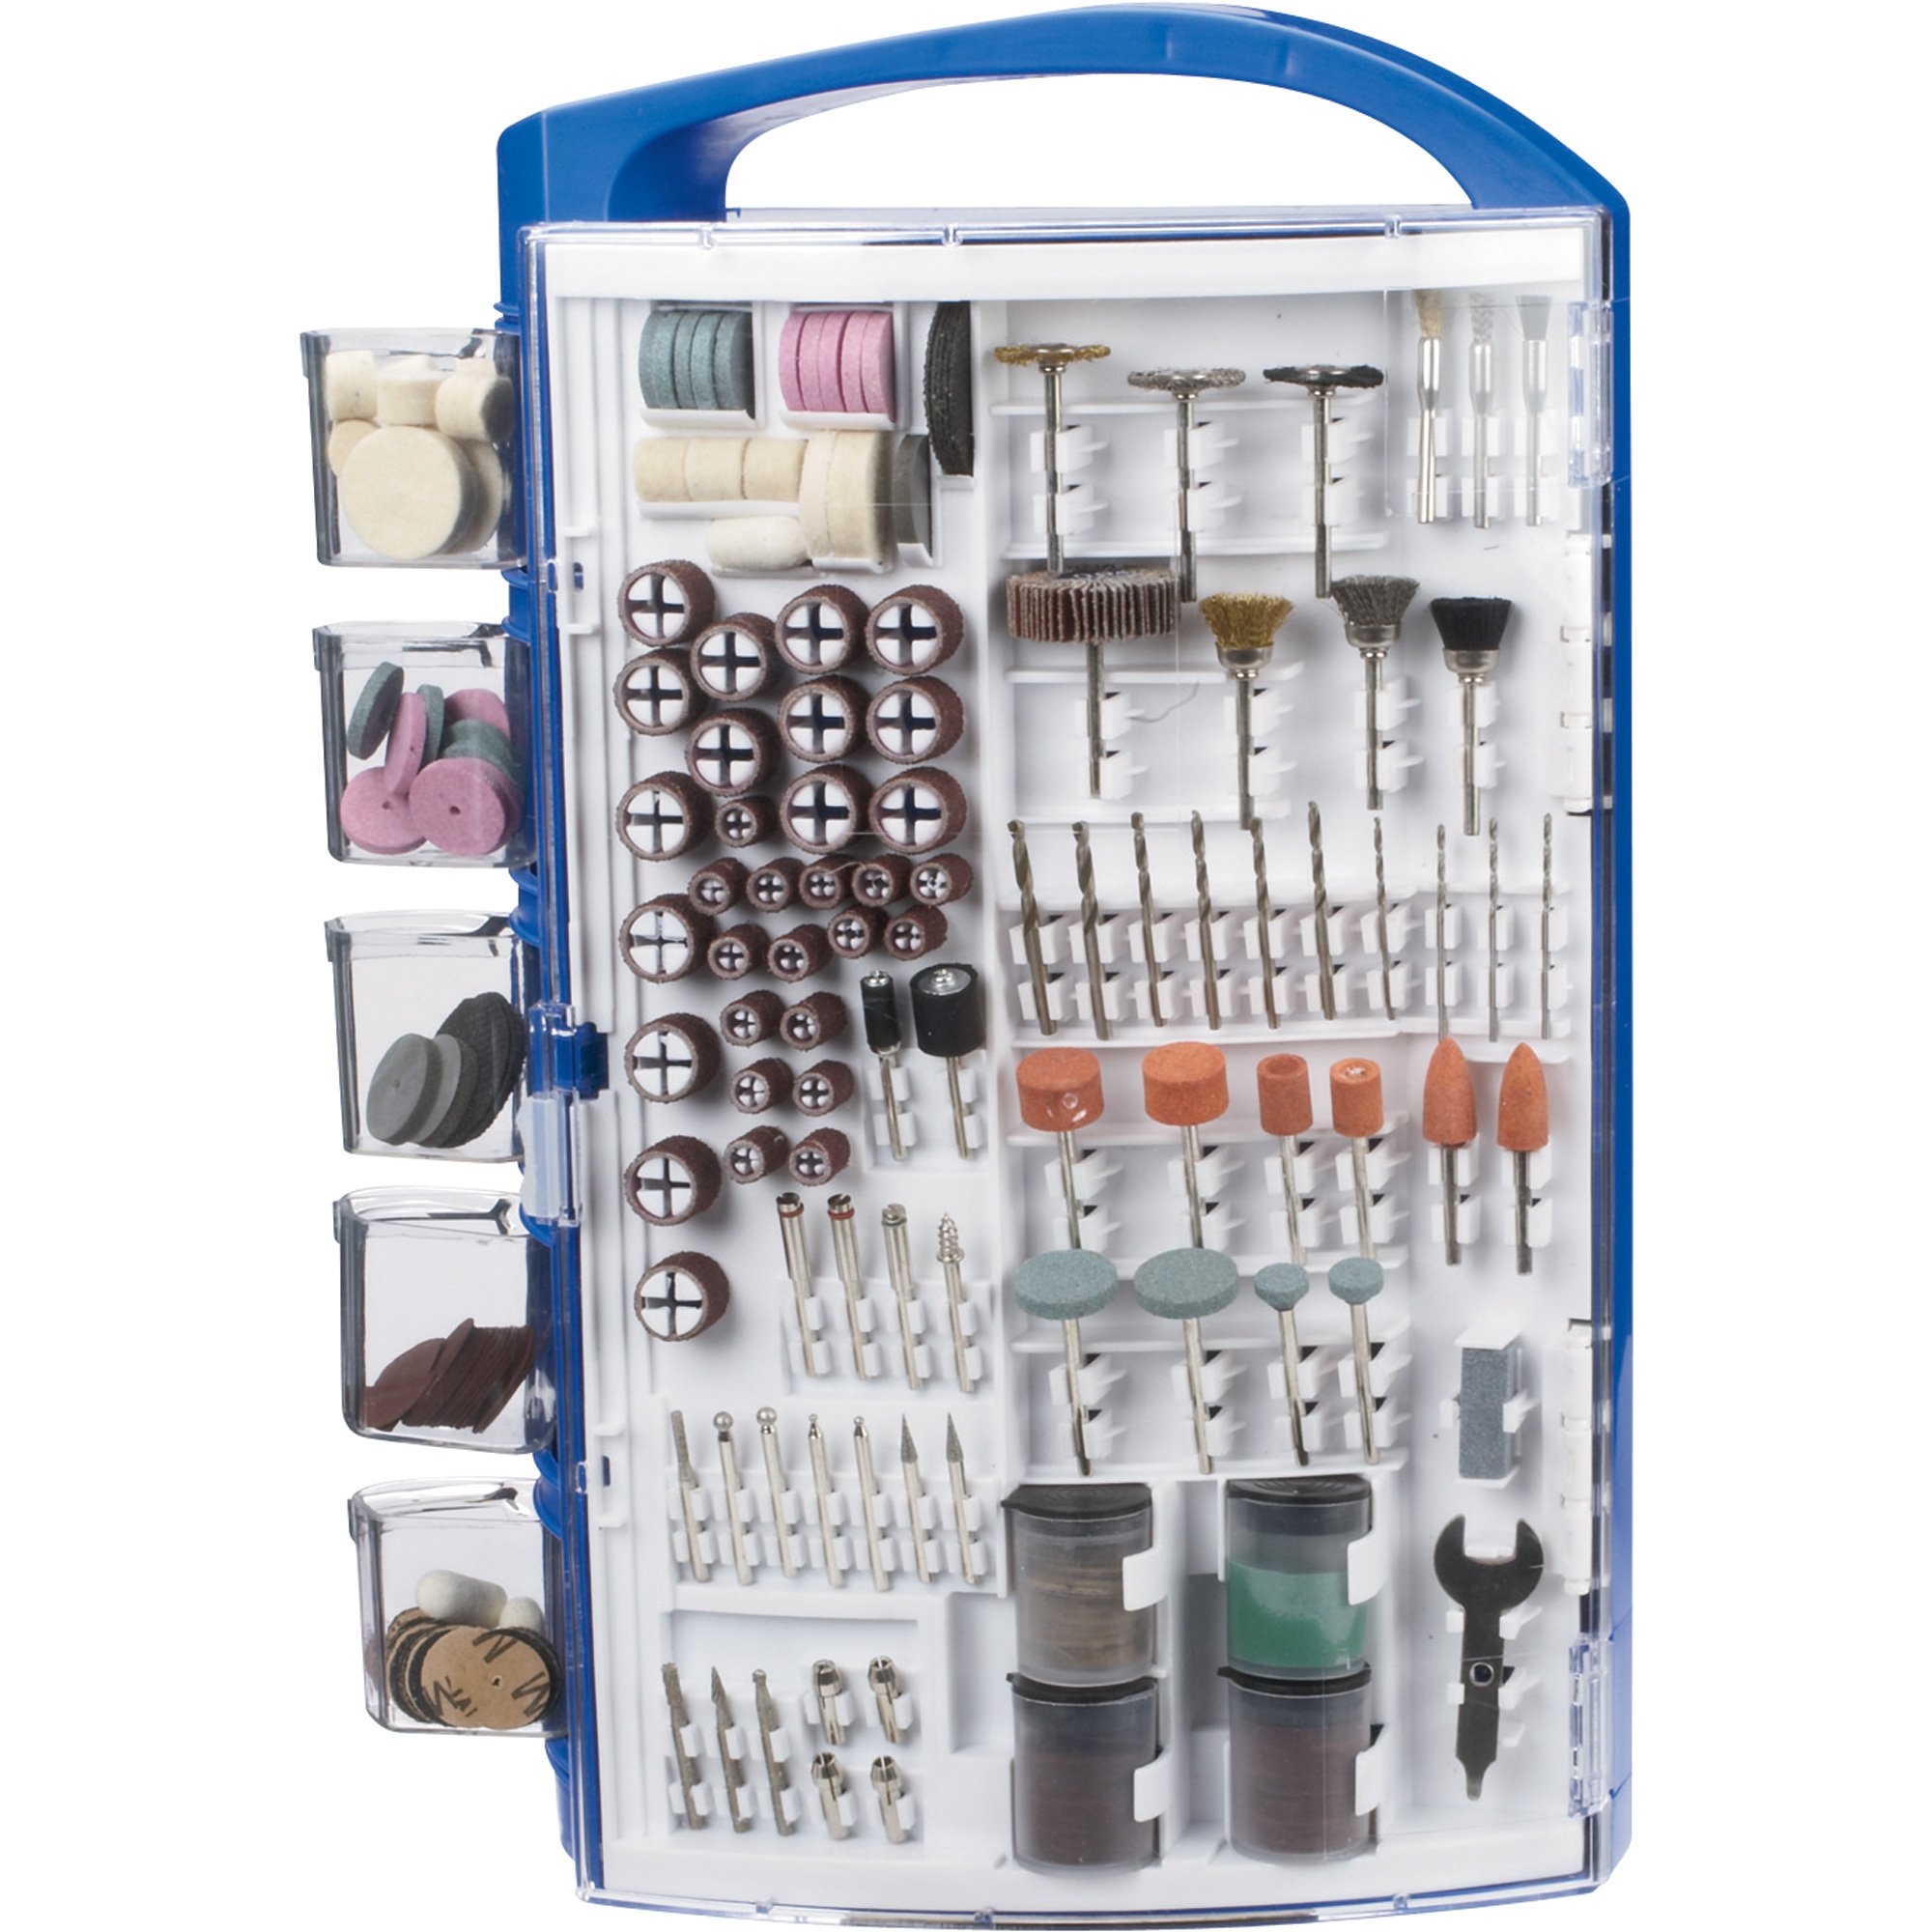 Northern Industrial Rotary Tool Accessories — 302-Pc. Set